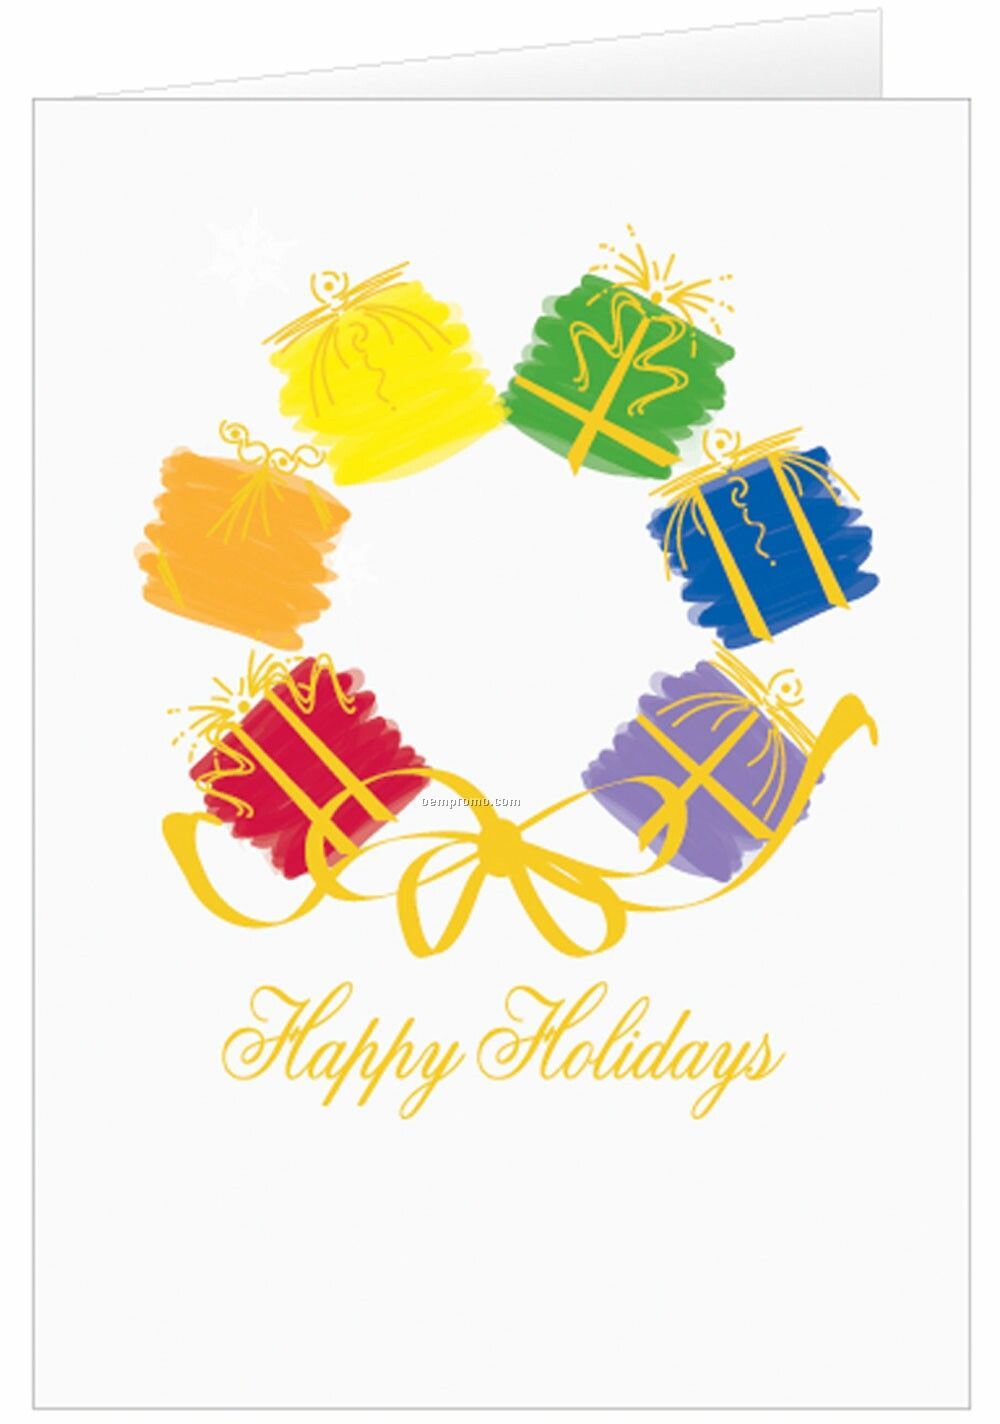 Wreath Of Presents Holiday Greeting Card